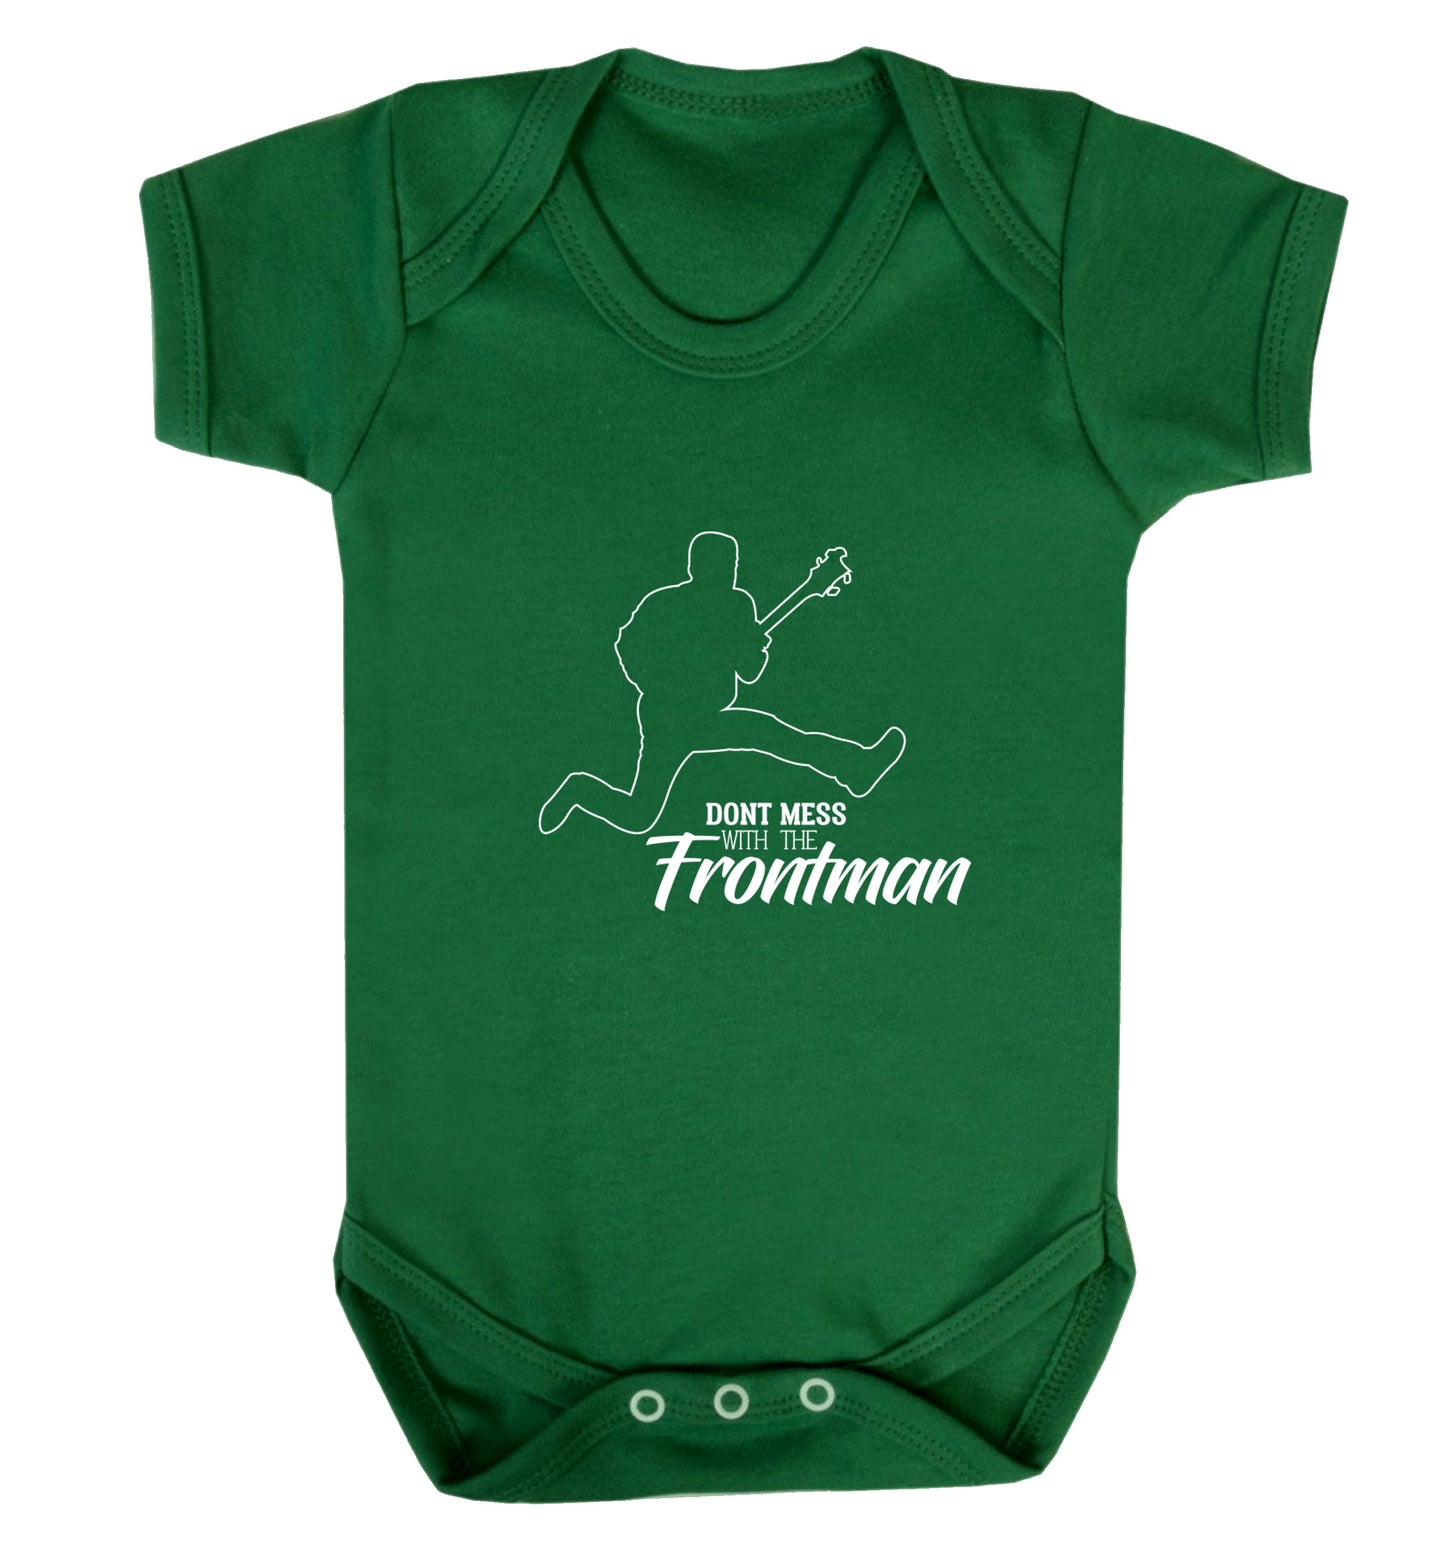 Don't mess with the frontman Baby Vest green 18-24 months